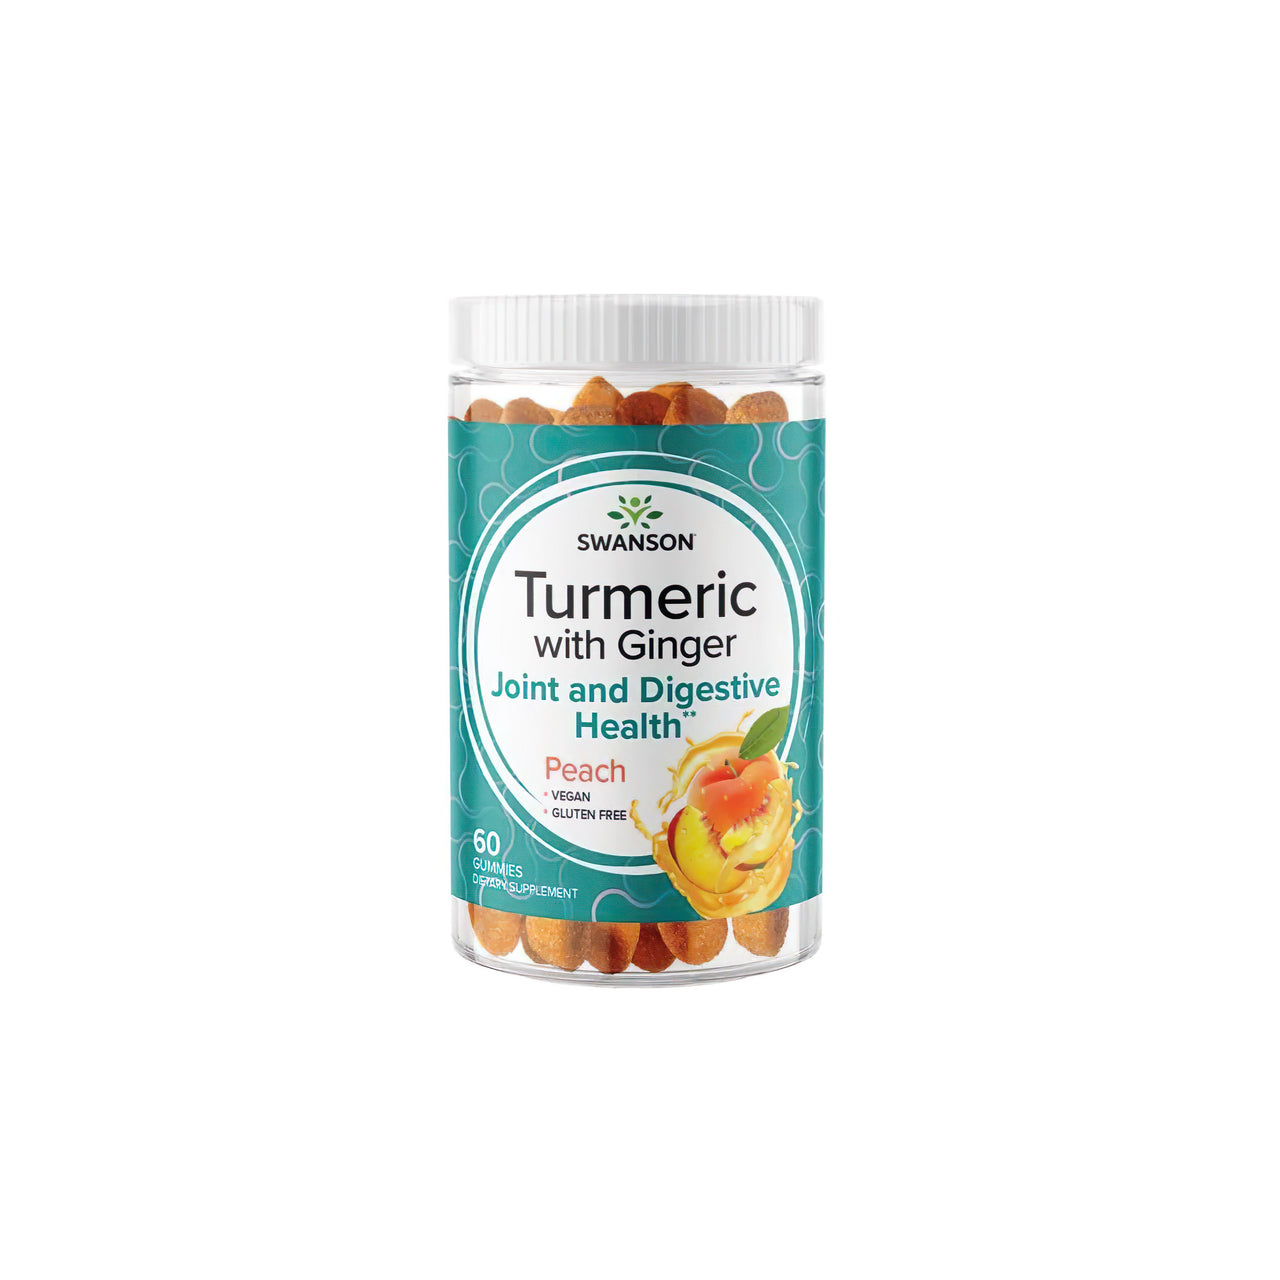 Turmeric with Ginger 60 gummies - Peach - front